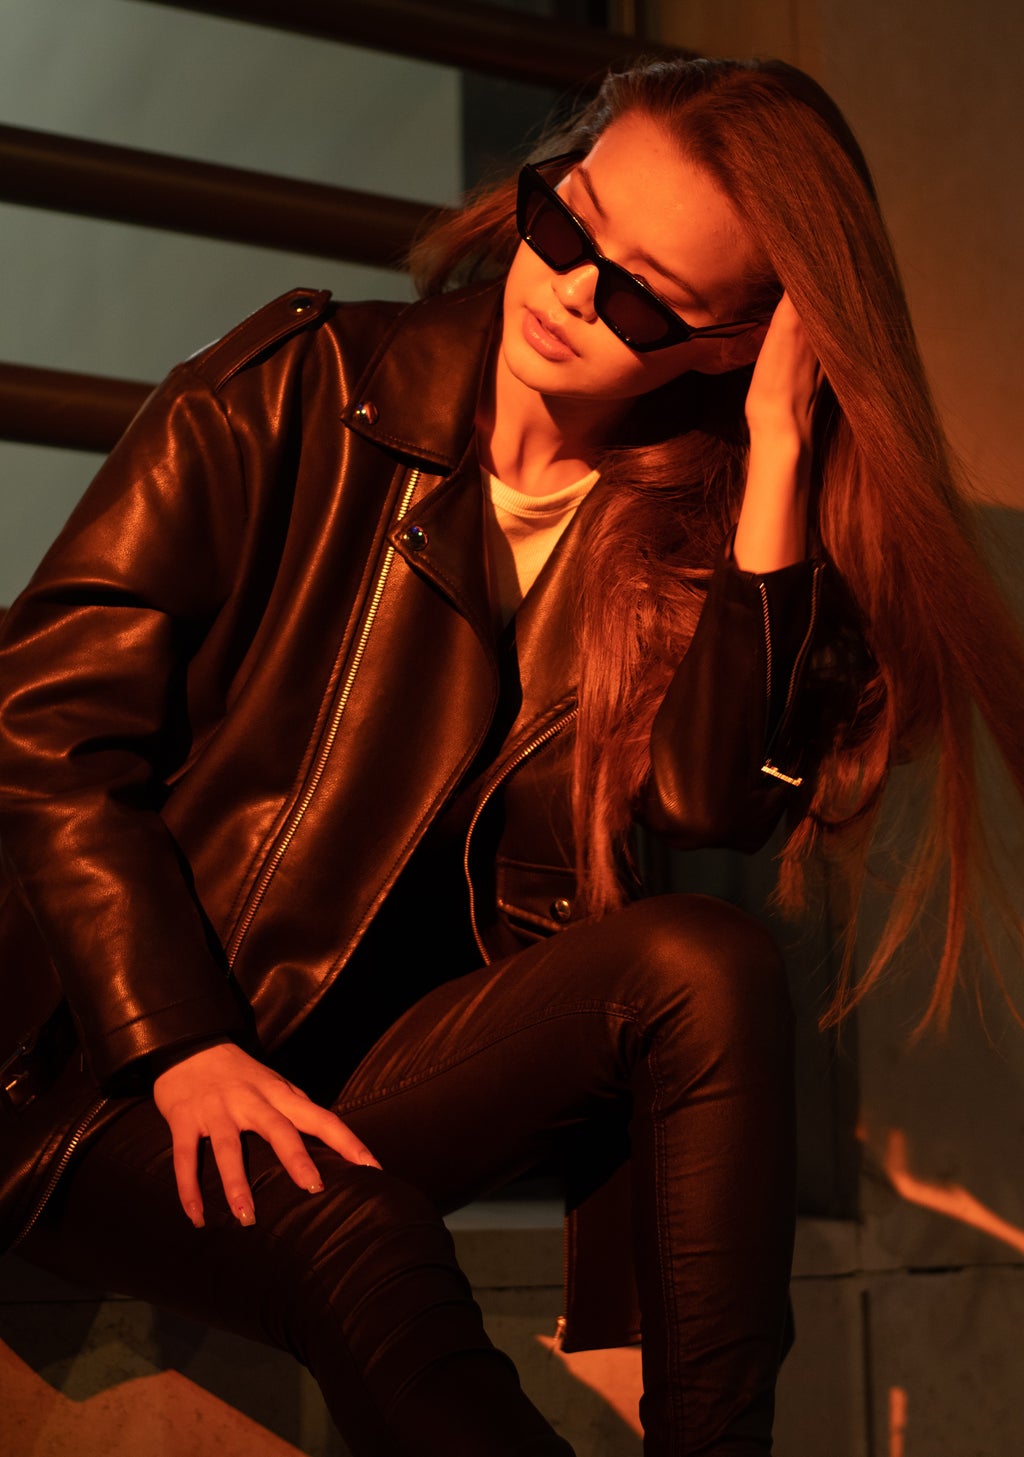 Woman with black sunglasses on and leather jacket.